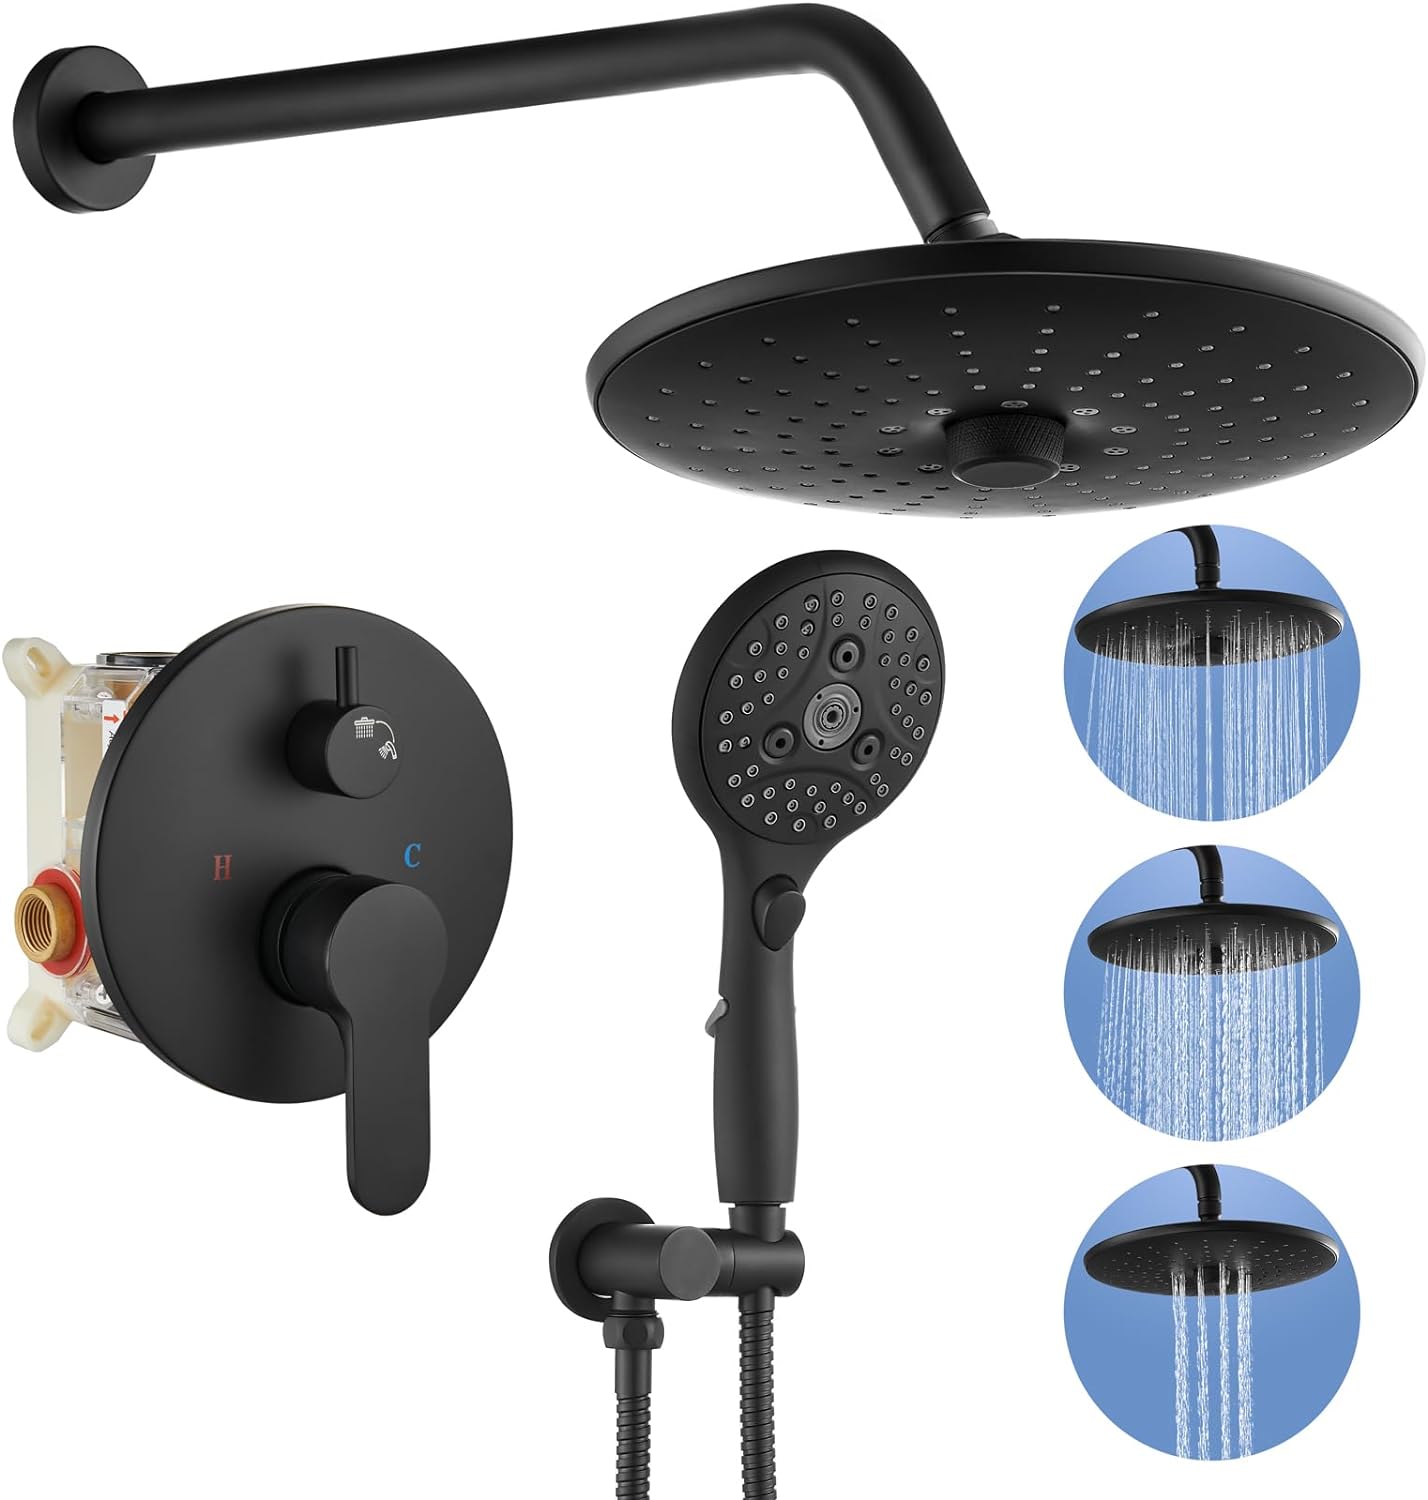 gotonovo Matte Black 10 Inch Round 3 Modes Rainfall Shower Head 6 Settings ABS Handheld Spray Wall Mounted Shower Trim Kit Shower System Pressure Balanced Rough-in Valve and Trim Included